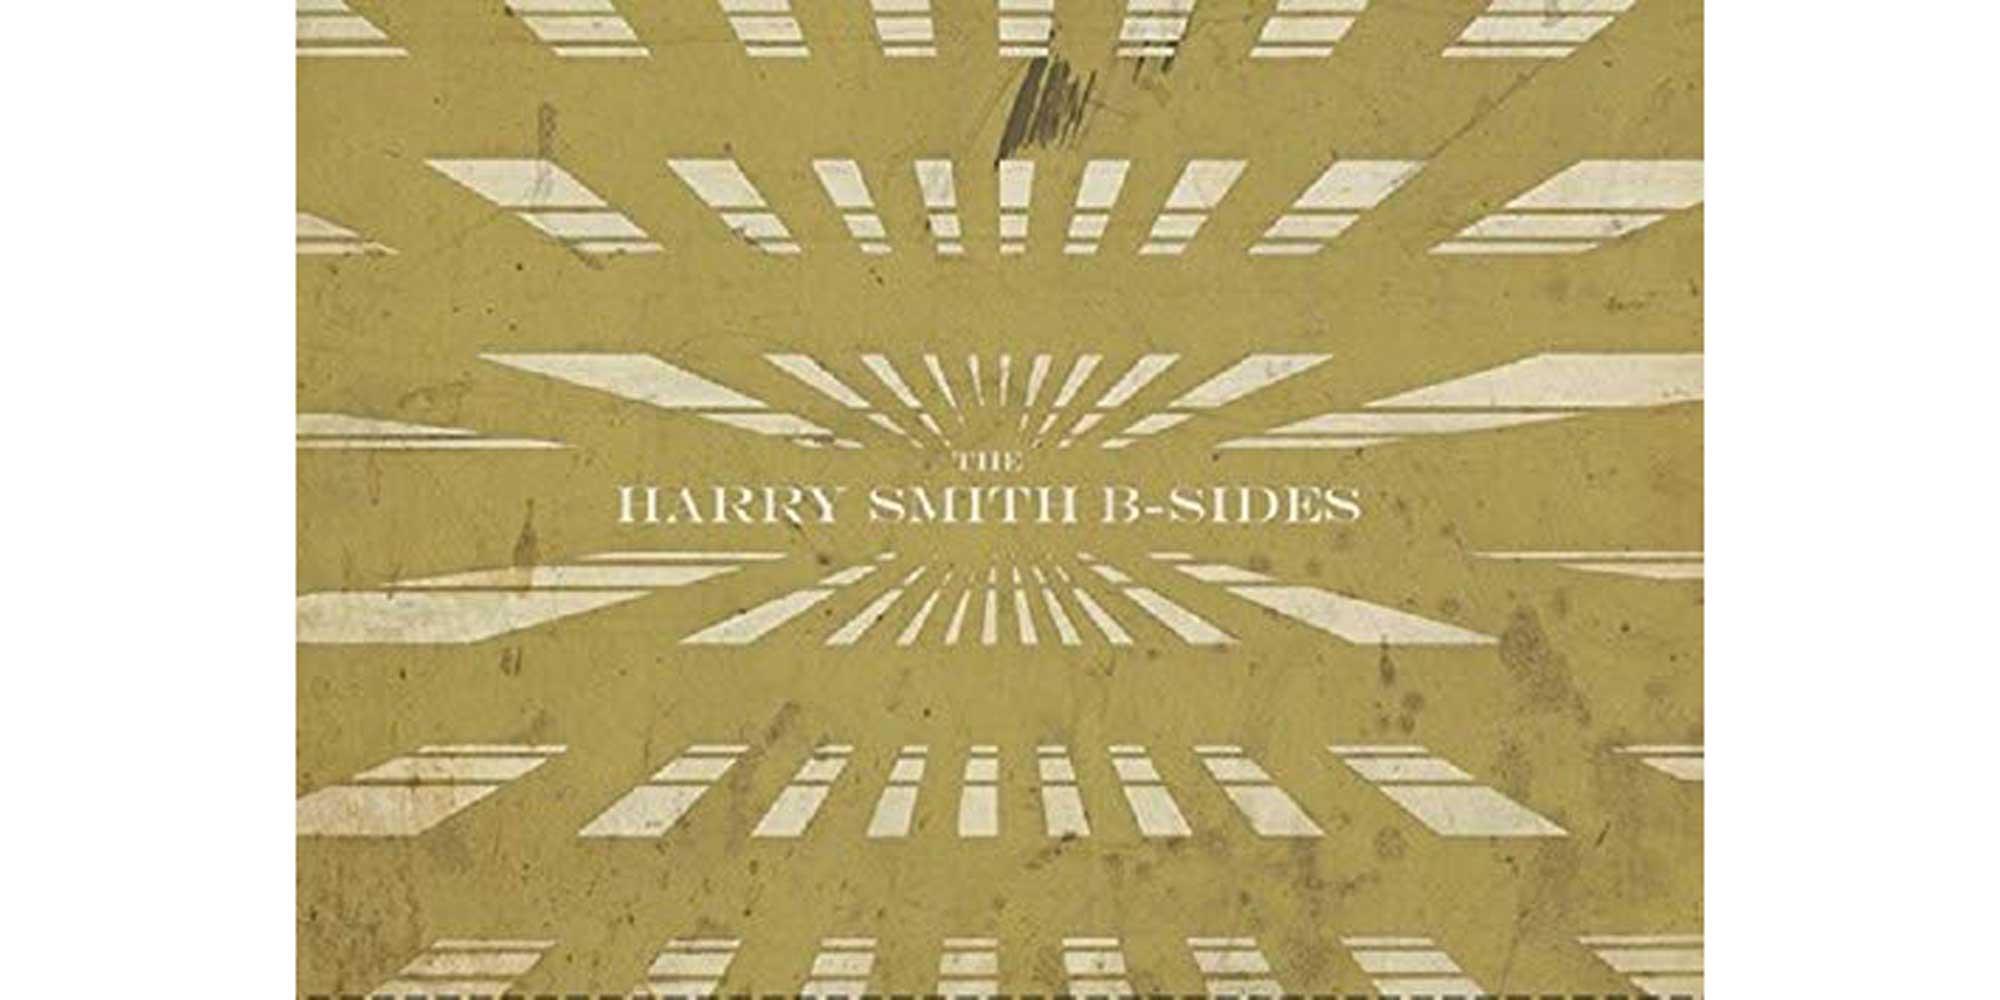 Various artists, The Harry Smith B-Sides